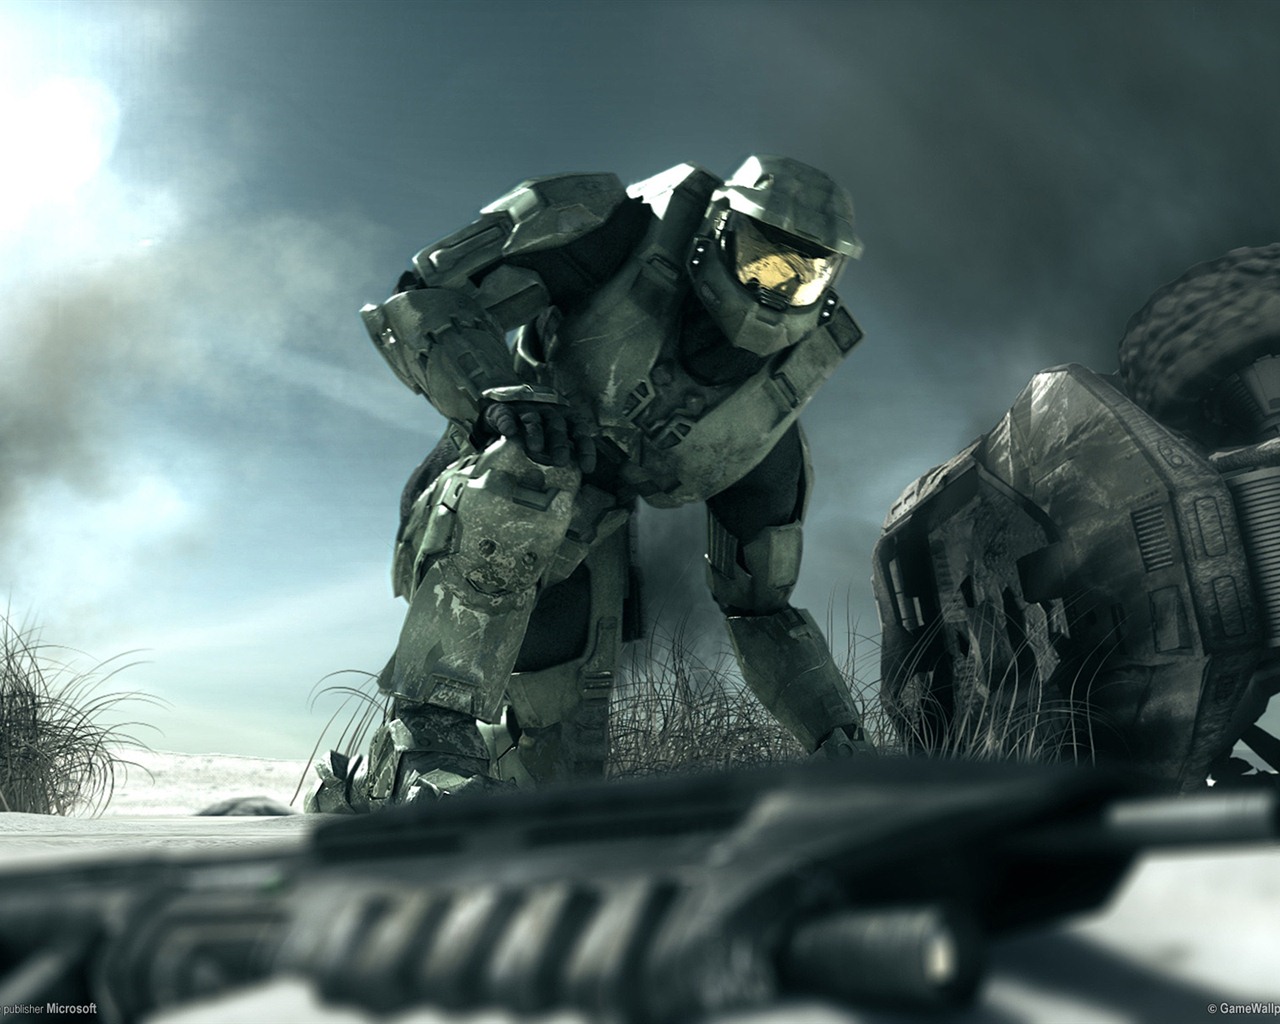 Halo game HD wallpapers #21 - 1280x1024